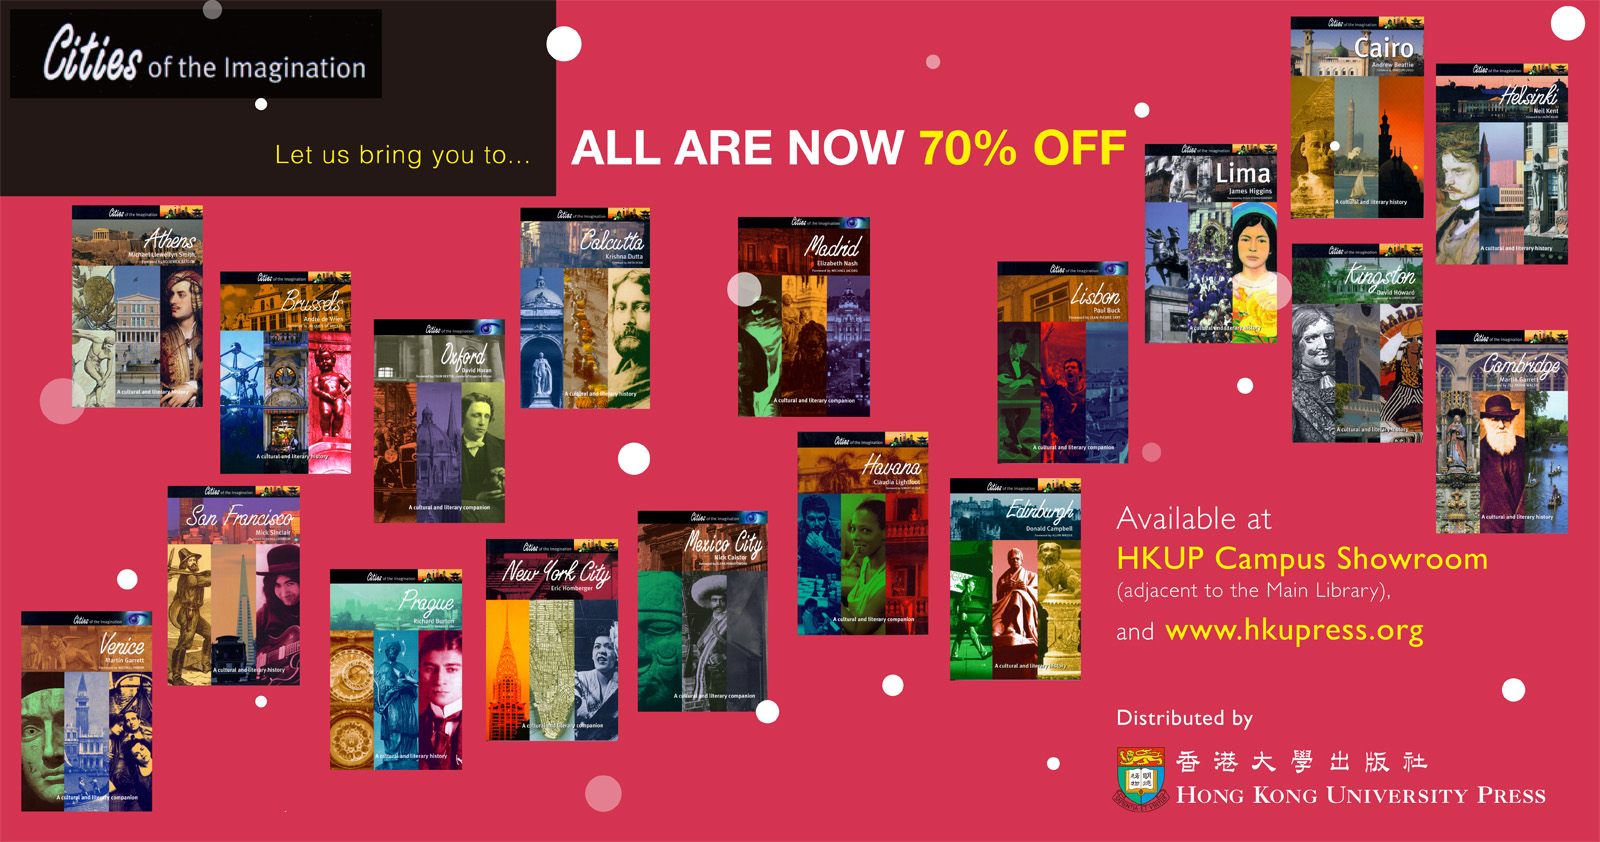 ALL ARE NOW 70% OFF in HKUP showroom and website www.hkupress.org